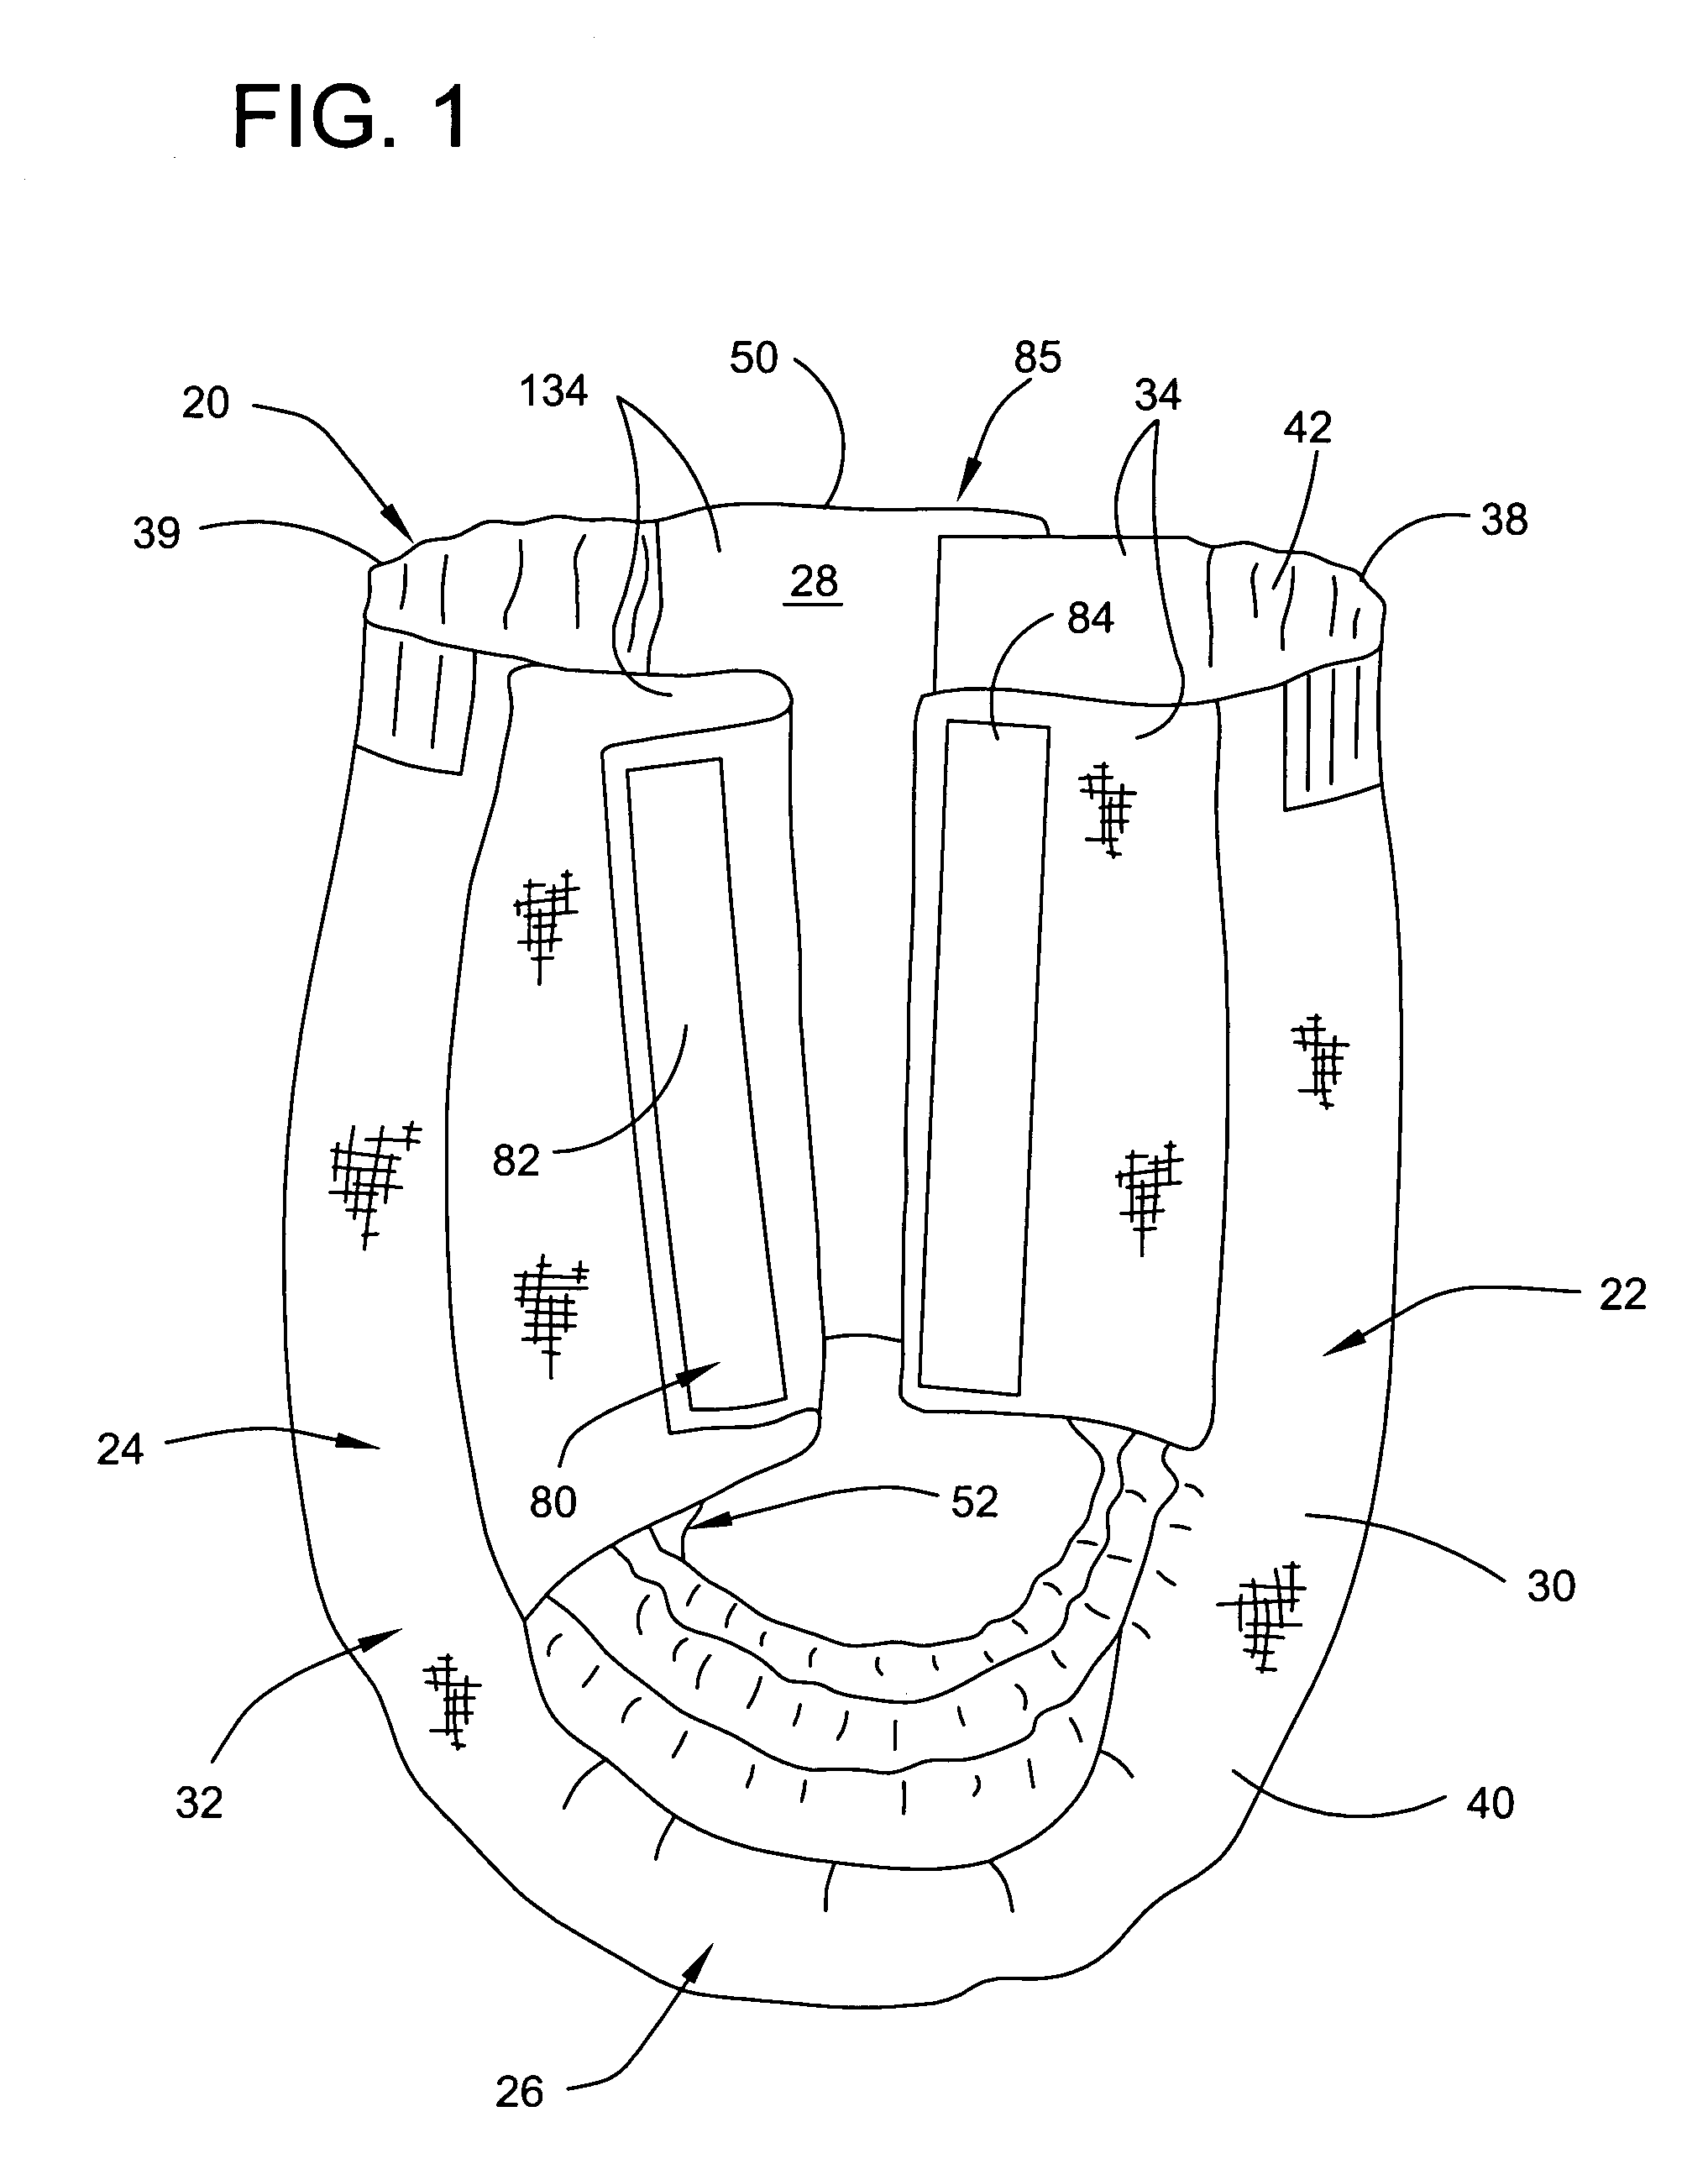 Absorbent article having an absorbent structure secured to a stretchable component of the article